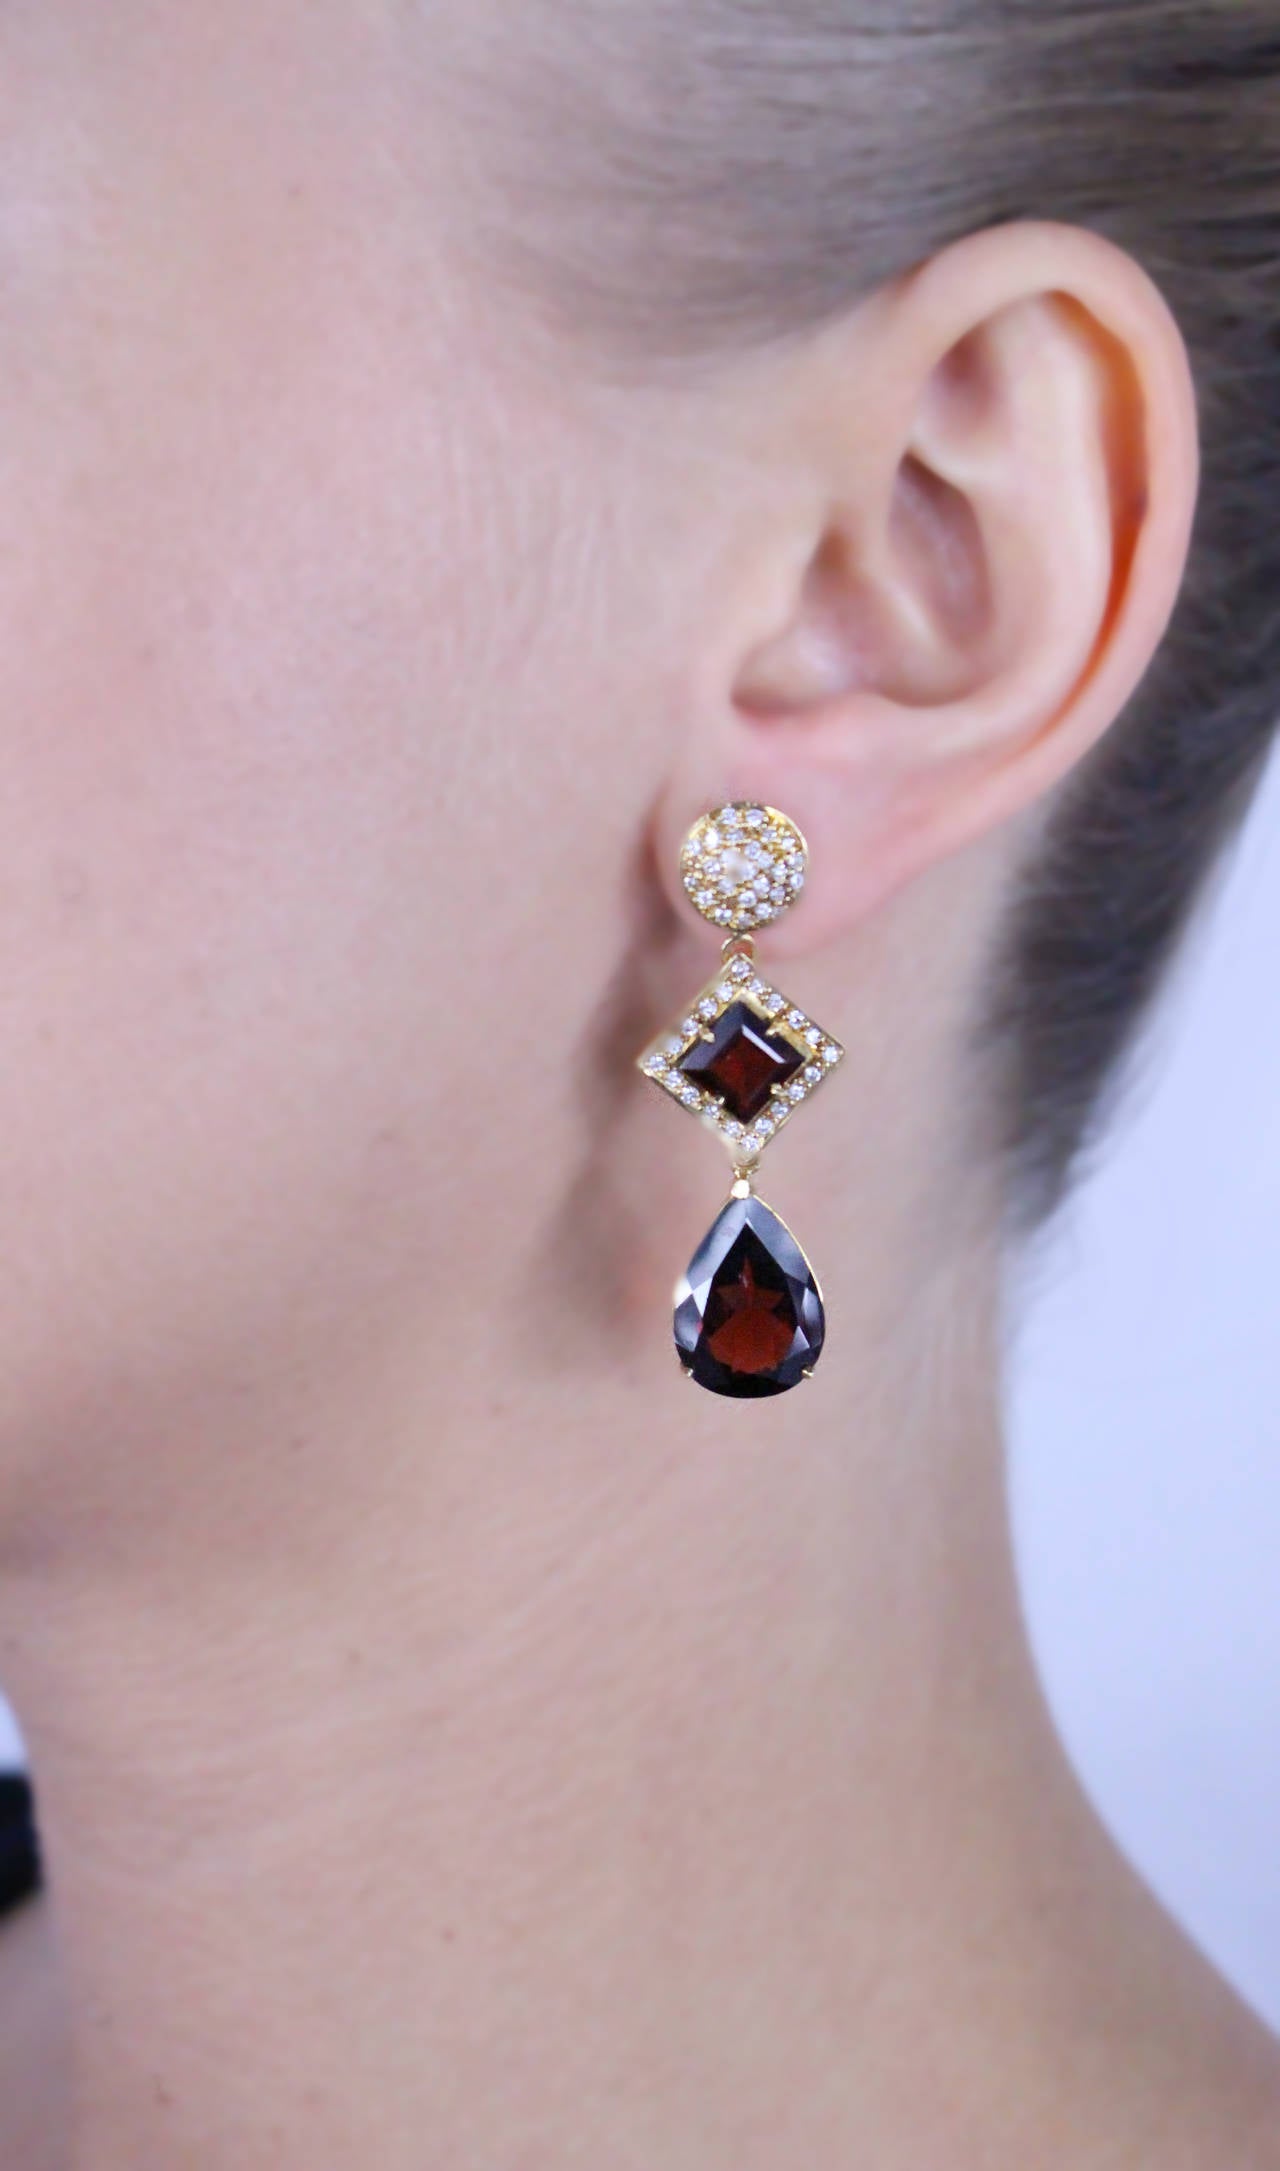 Gorgeous Drop Earrings set with 2 square and 2 pear shape almandine garnets weighing 20.72 carats and round brilliant cut diamonds weighing 0.70 carats.

Earrings length: 1.75 Inches
Metal Type: 18 Karat Yellow Gold
Metal Weight: 12.8 Grams